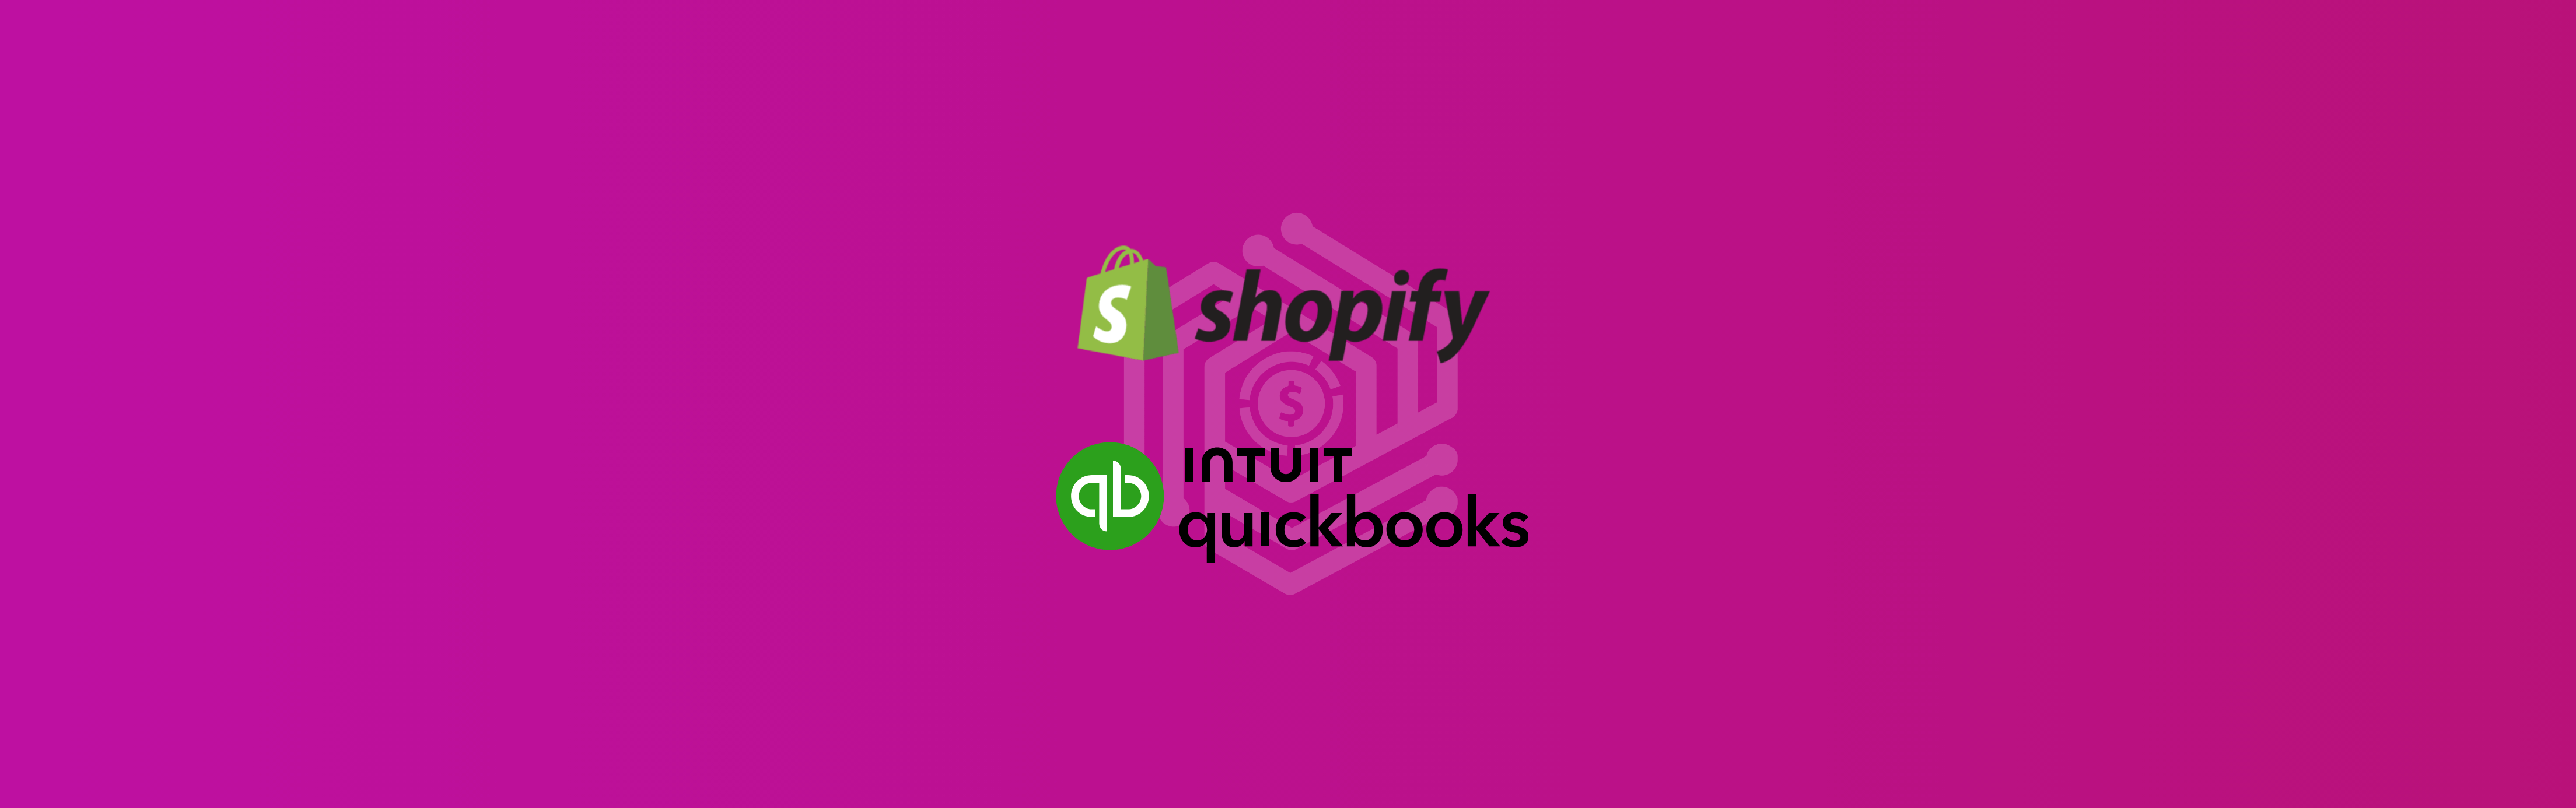 Shopify QuickBooks Integration: How to Set up Shopify Integration with QuickBooks